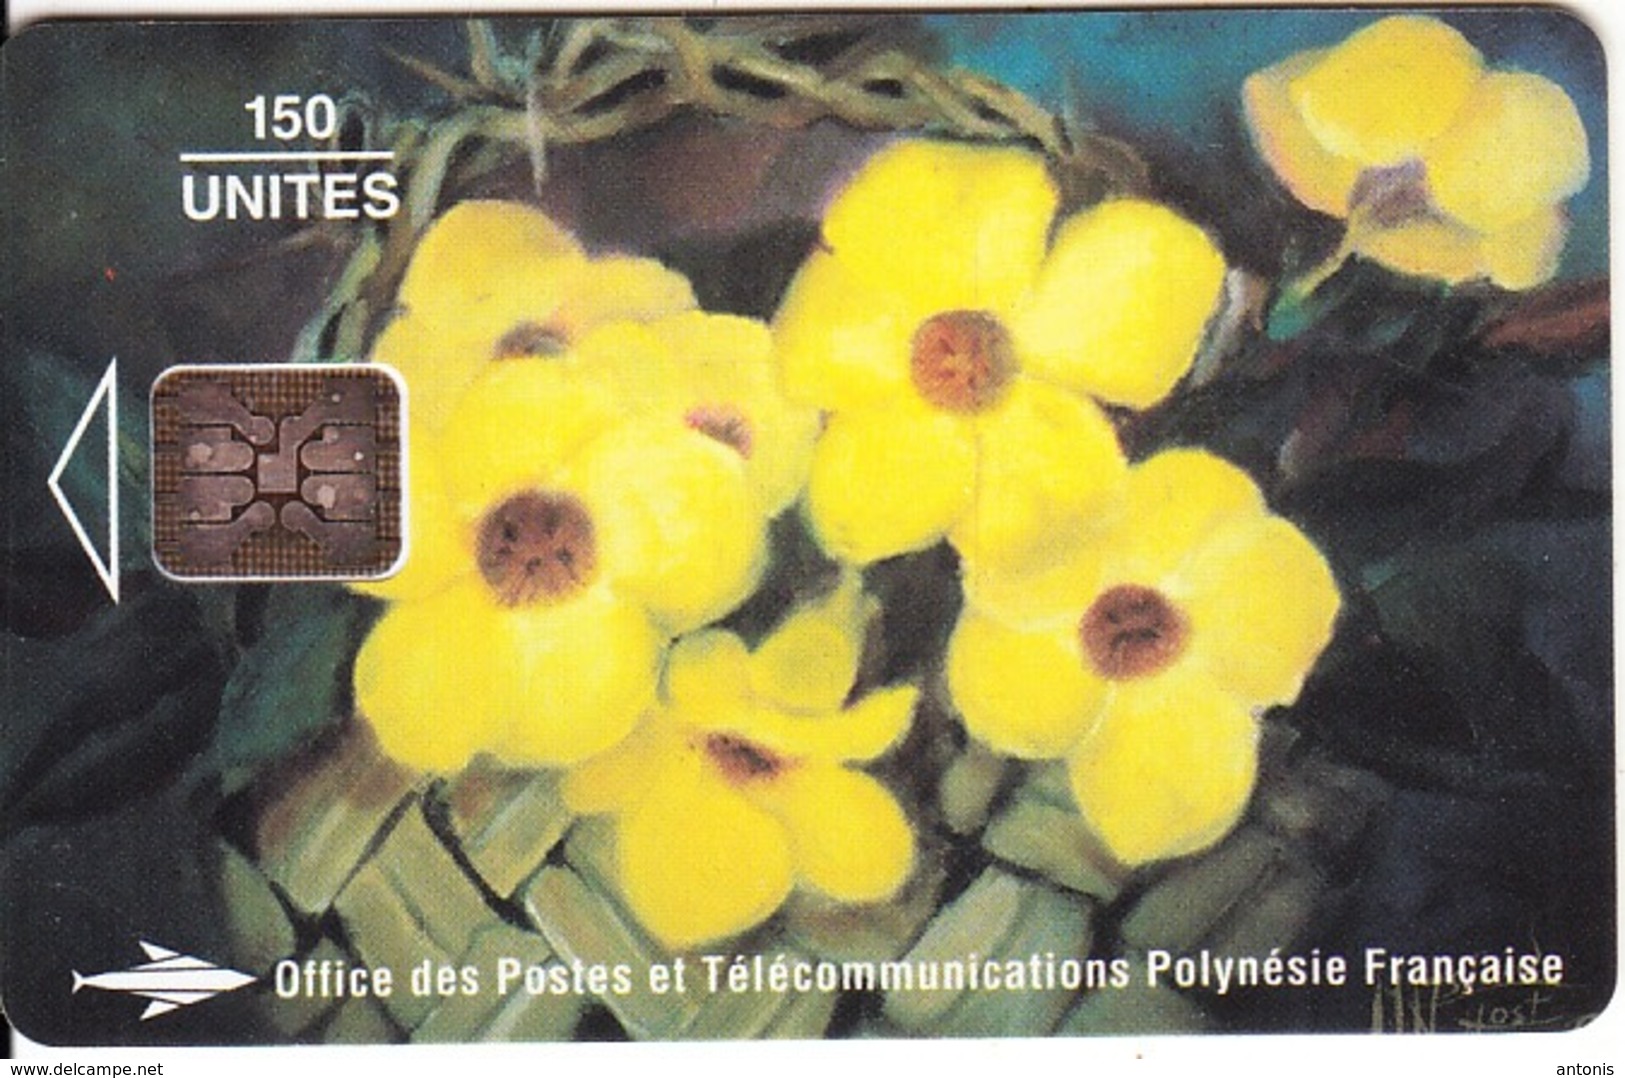 FRENCH POLYNESIA - Les Monettes, Painting/Marie Astrid Host, CN : C47100868, Tirage %20000, 08/94, Used - Polinesia Francese